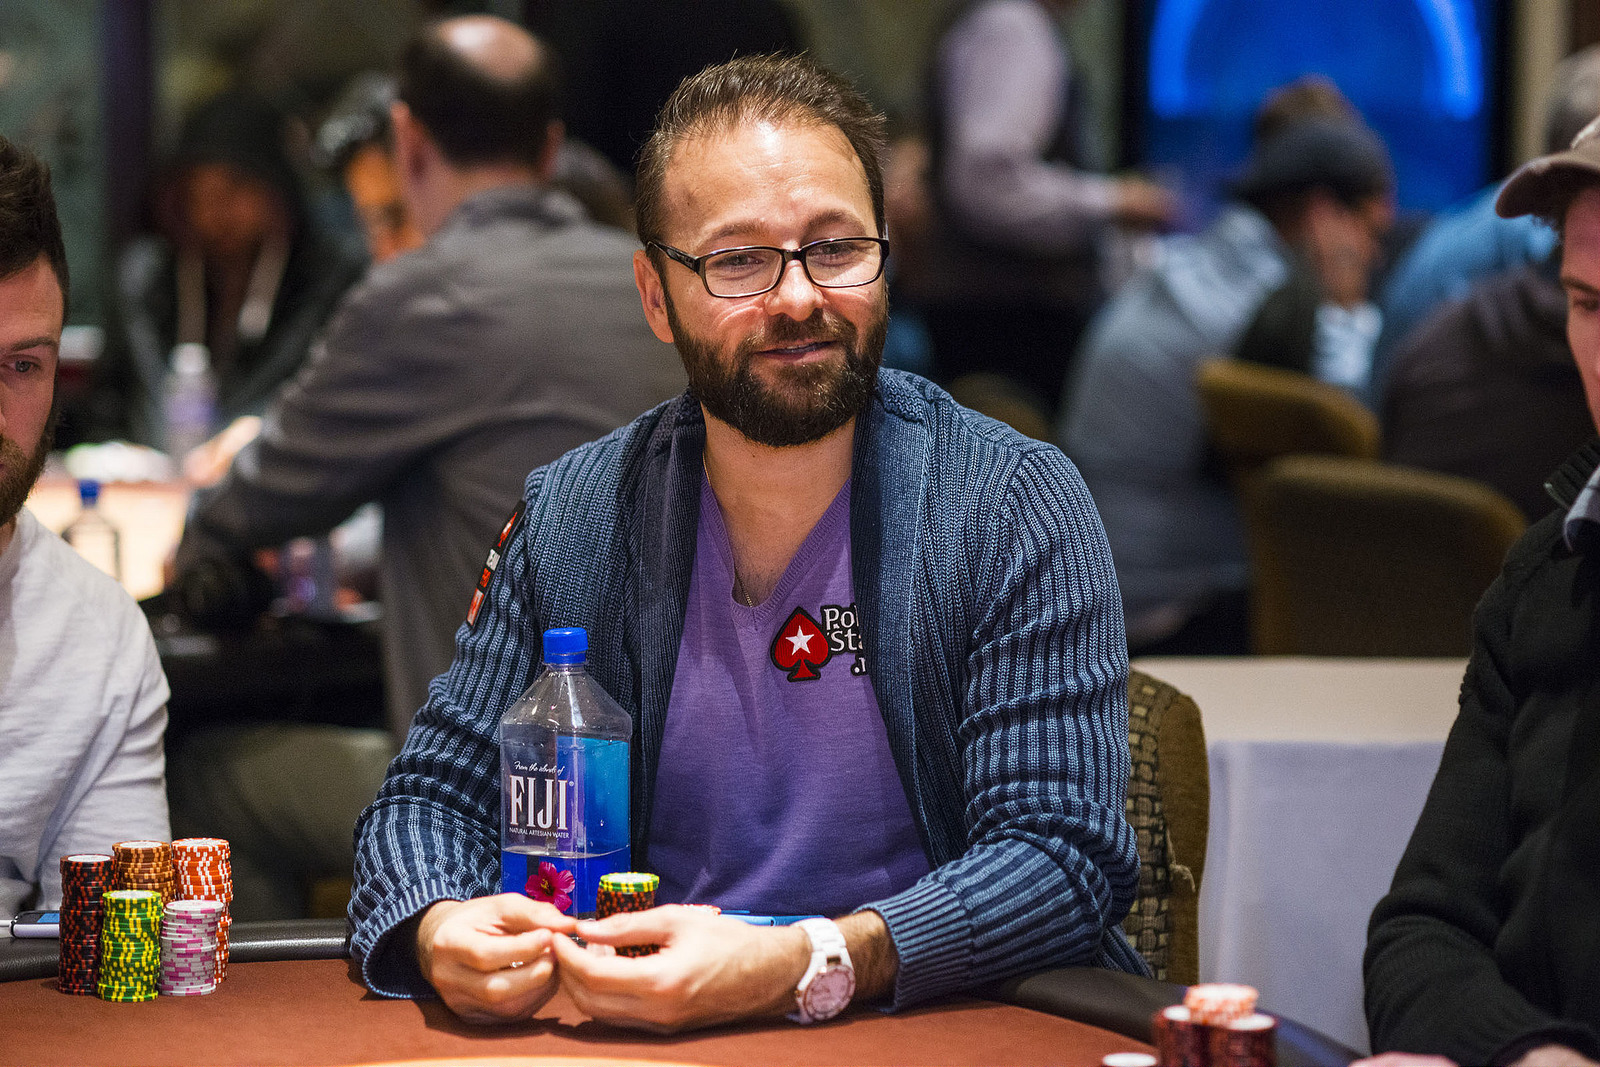 Daniel Negreanu Finally Bags Chips After Six WPT Five Diamond World Poker Classic Main Event Buy-Ins